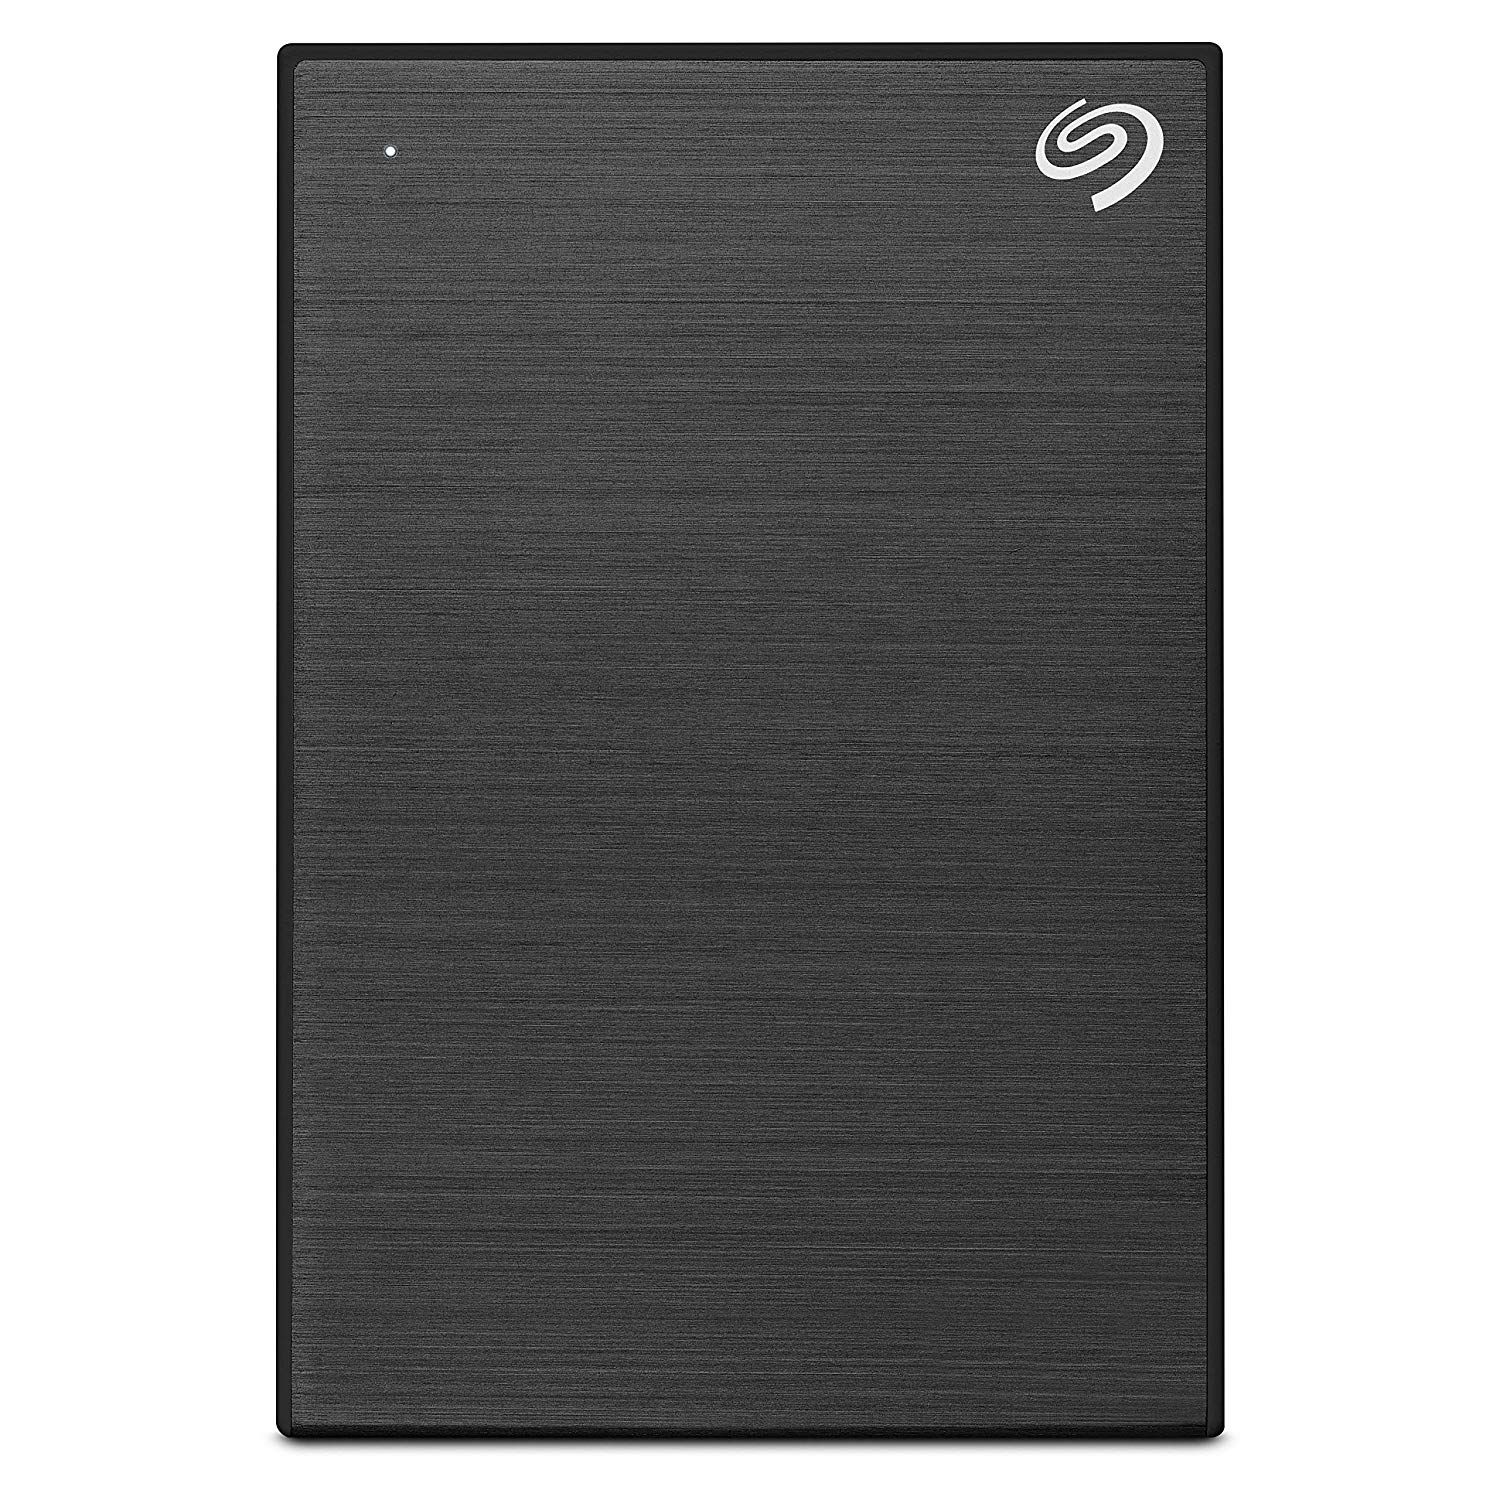     			Seagate Backup Plus Slim 2TB External Hard Drive Portable HDD  Black USB 3.0 for PC Laptop and Mac, 1 year Mylio Create, 4 Months Adobe CC Photography, and 3-year Rescue Services (STHN2000400)